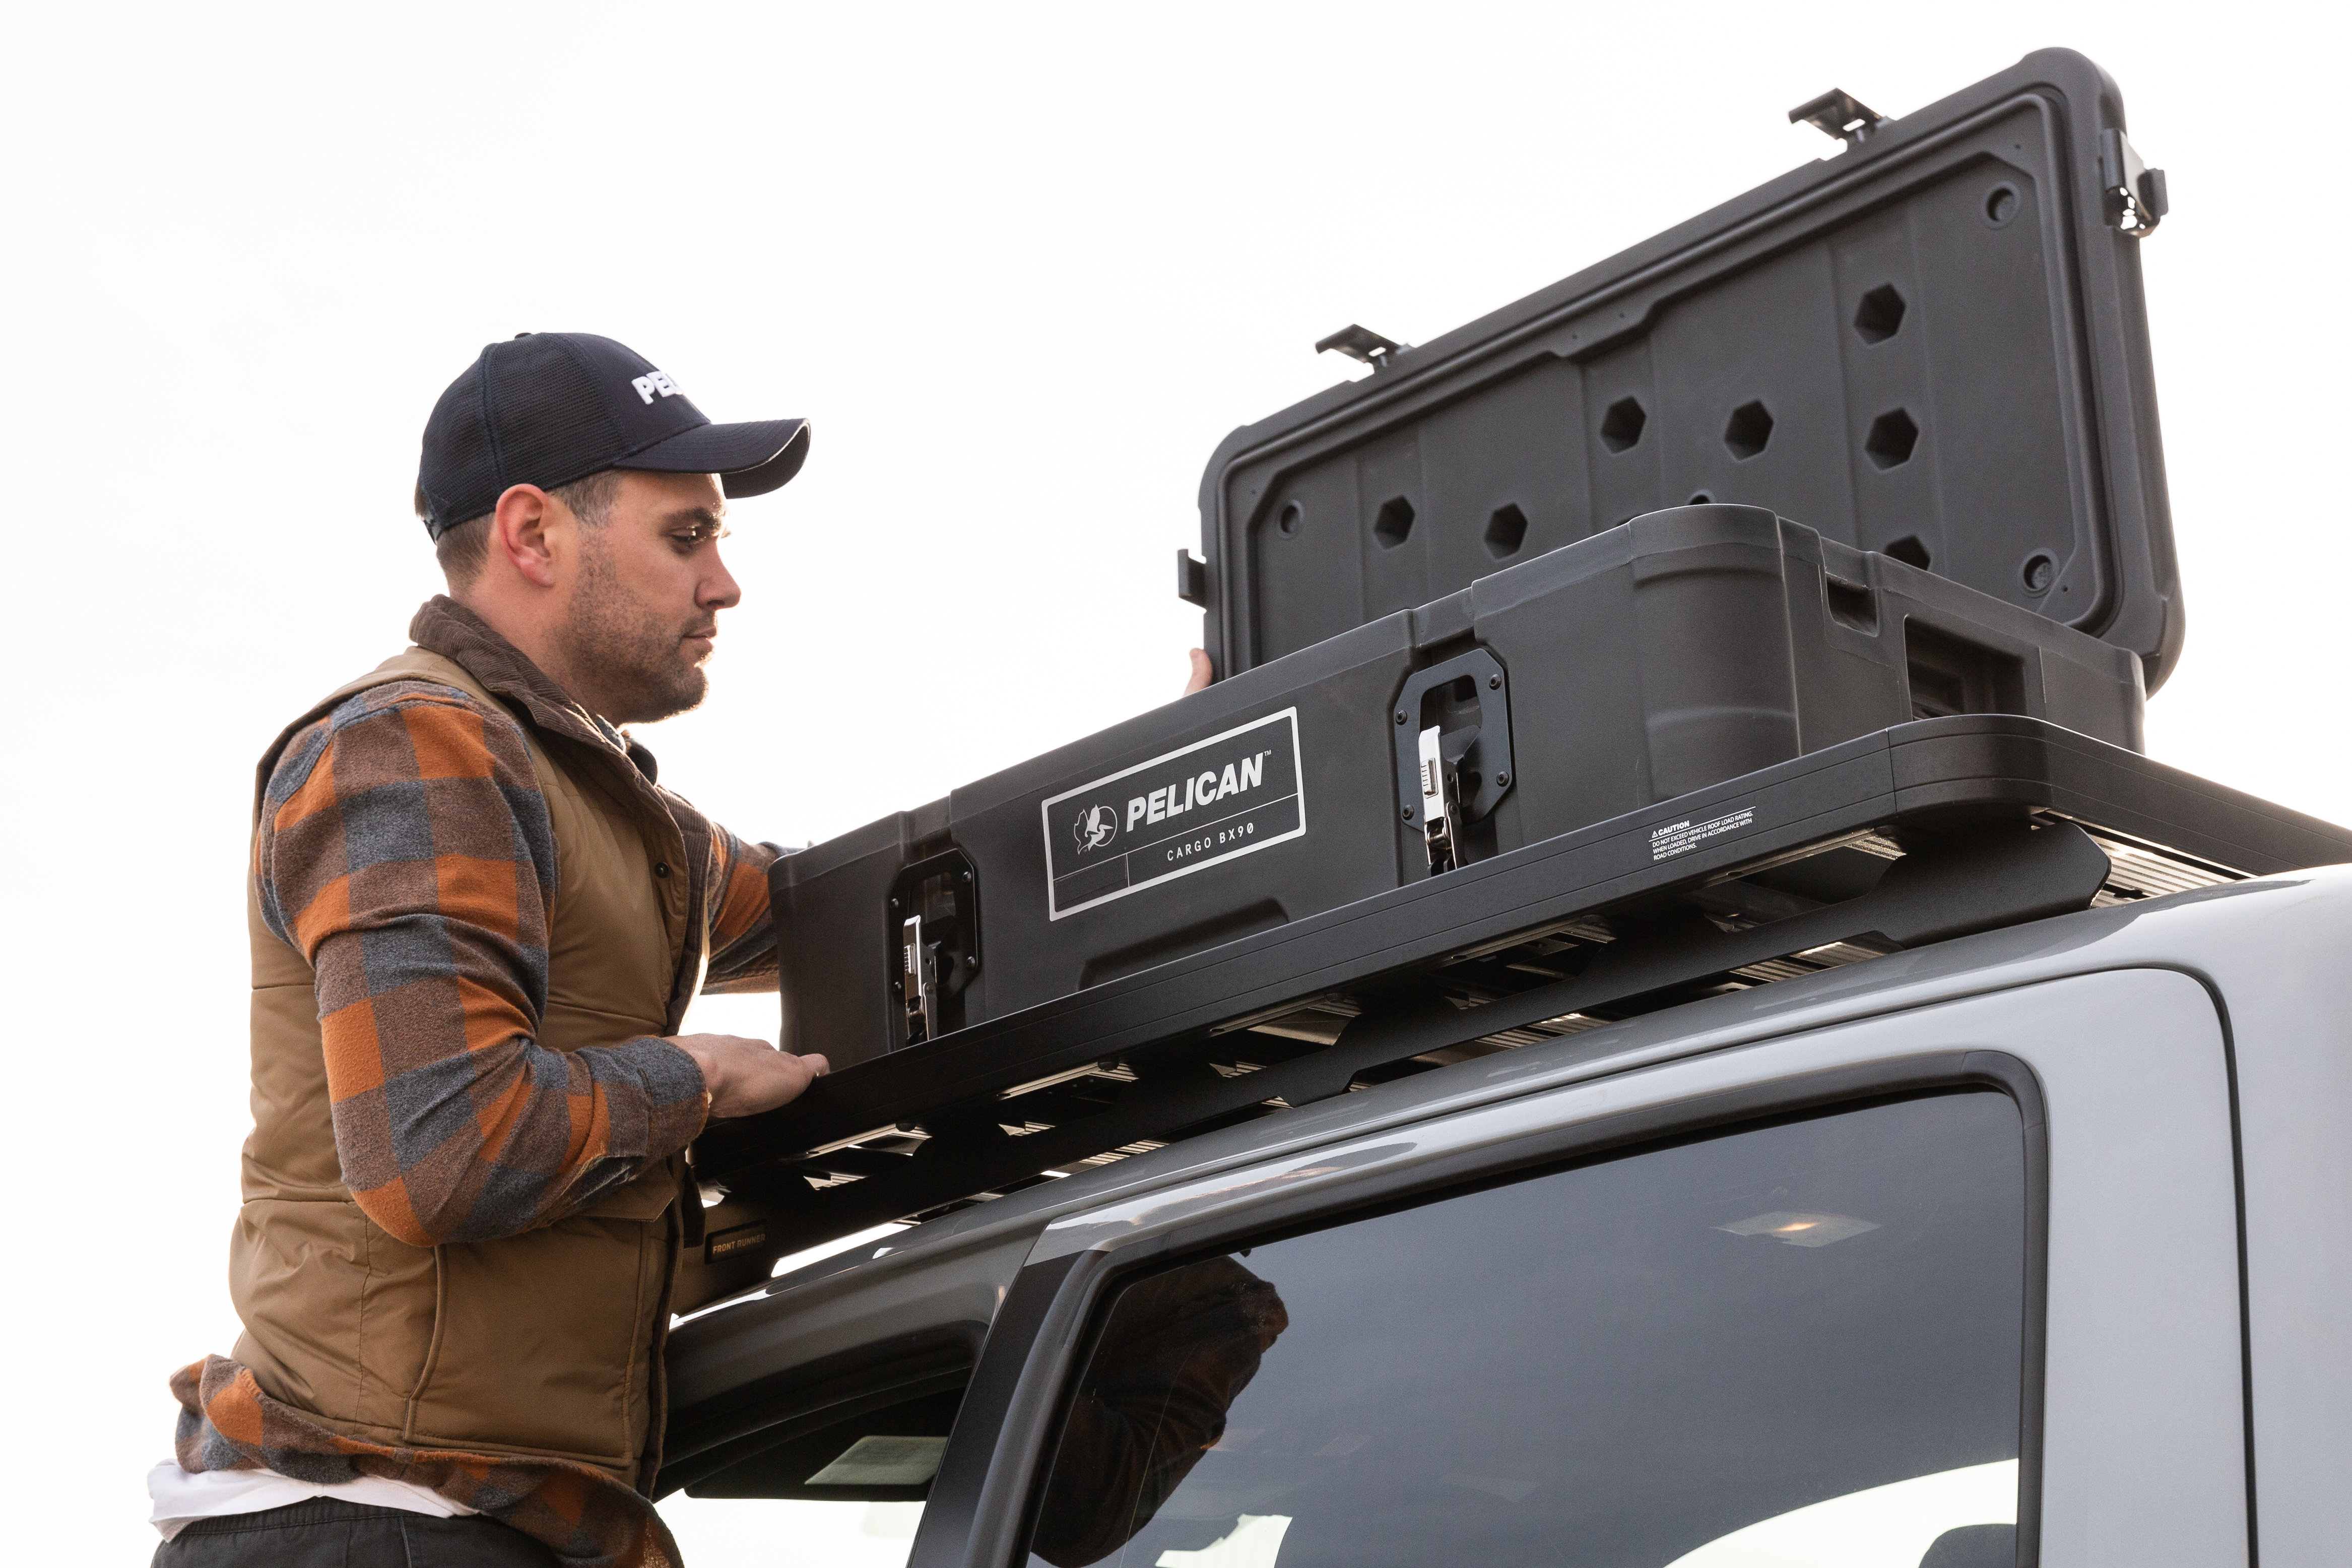 New Pelican CARGO Cases For The Off-Road Enthusiast